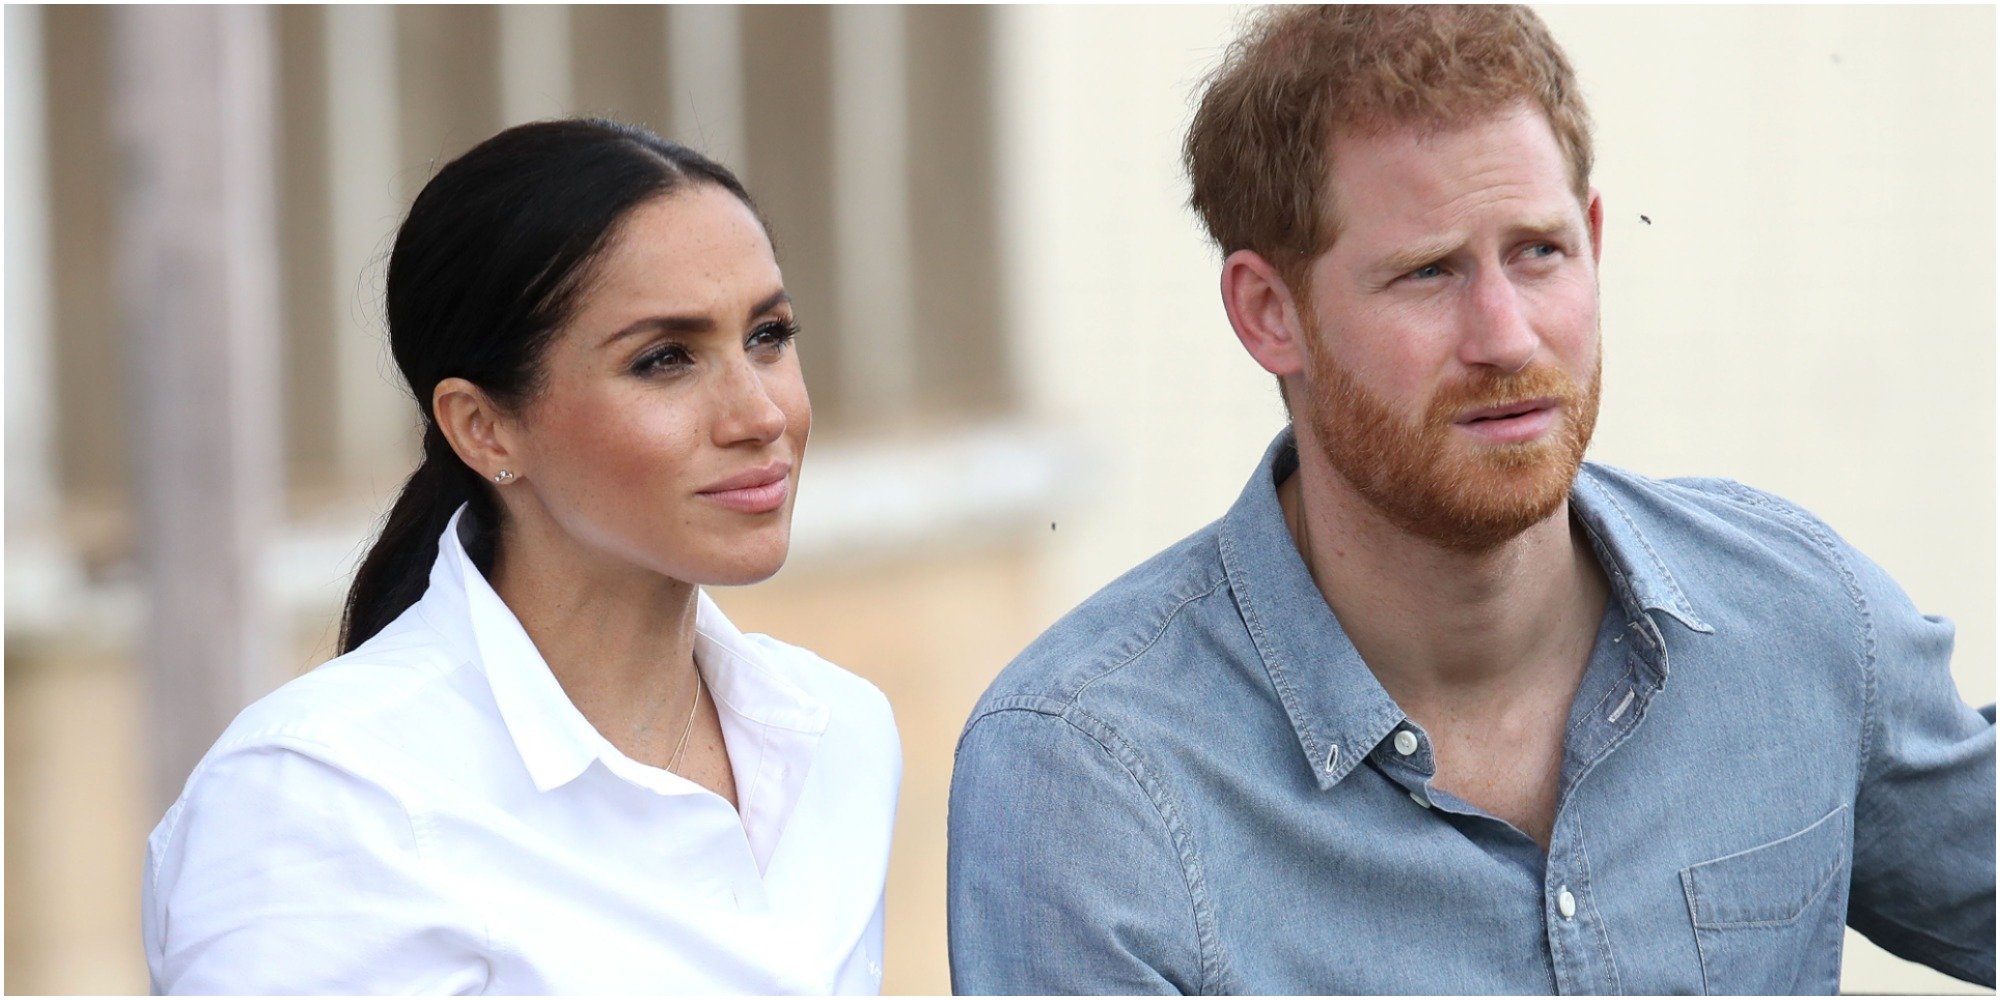 Meghan Markle ‘Wasn’t Key Agitator’ in Royal Exit: Prince Harry Was ‘a Deeply Unhappy Man,’ Royal Expert Says